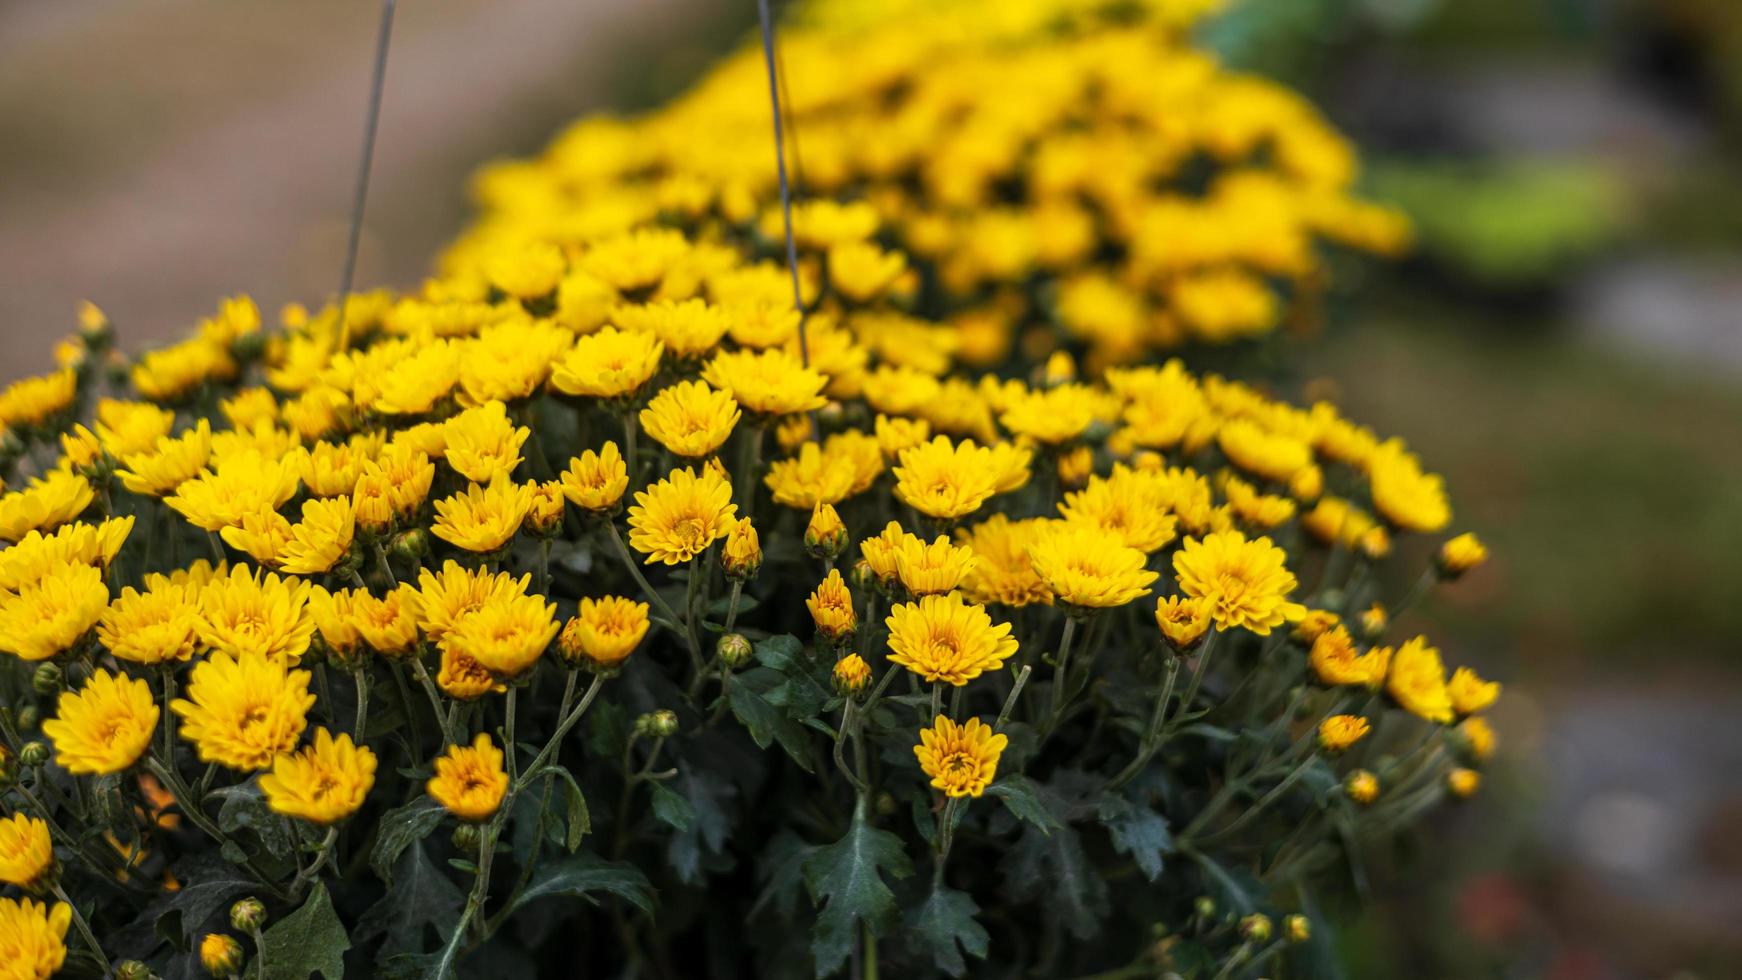 A close-up view of clusters of small yellow chrysanthemums beautifully blooming in black plastic pots. photo